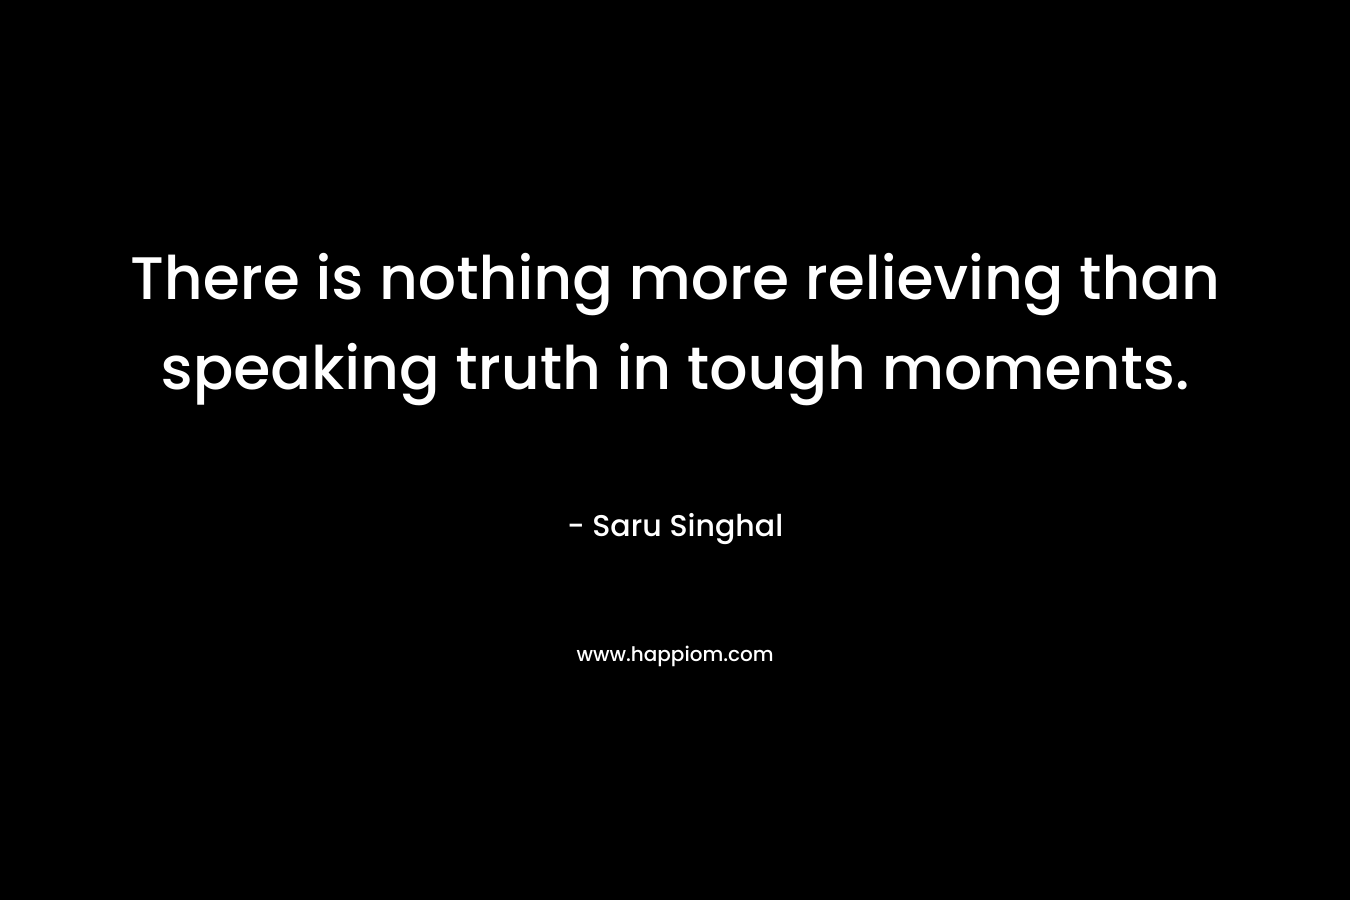 There is nothing more relieving than speaking truth in tough moments. – Saru Singhal